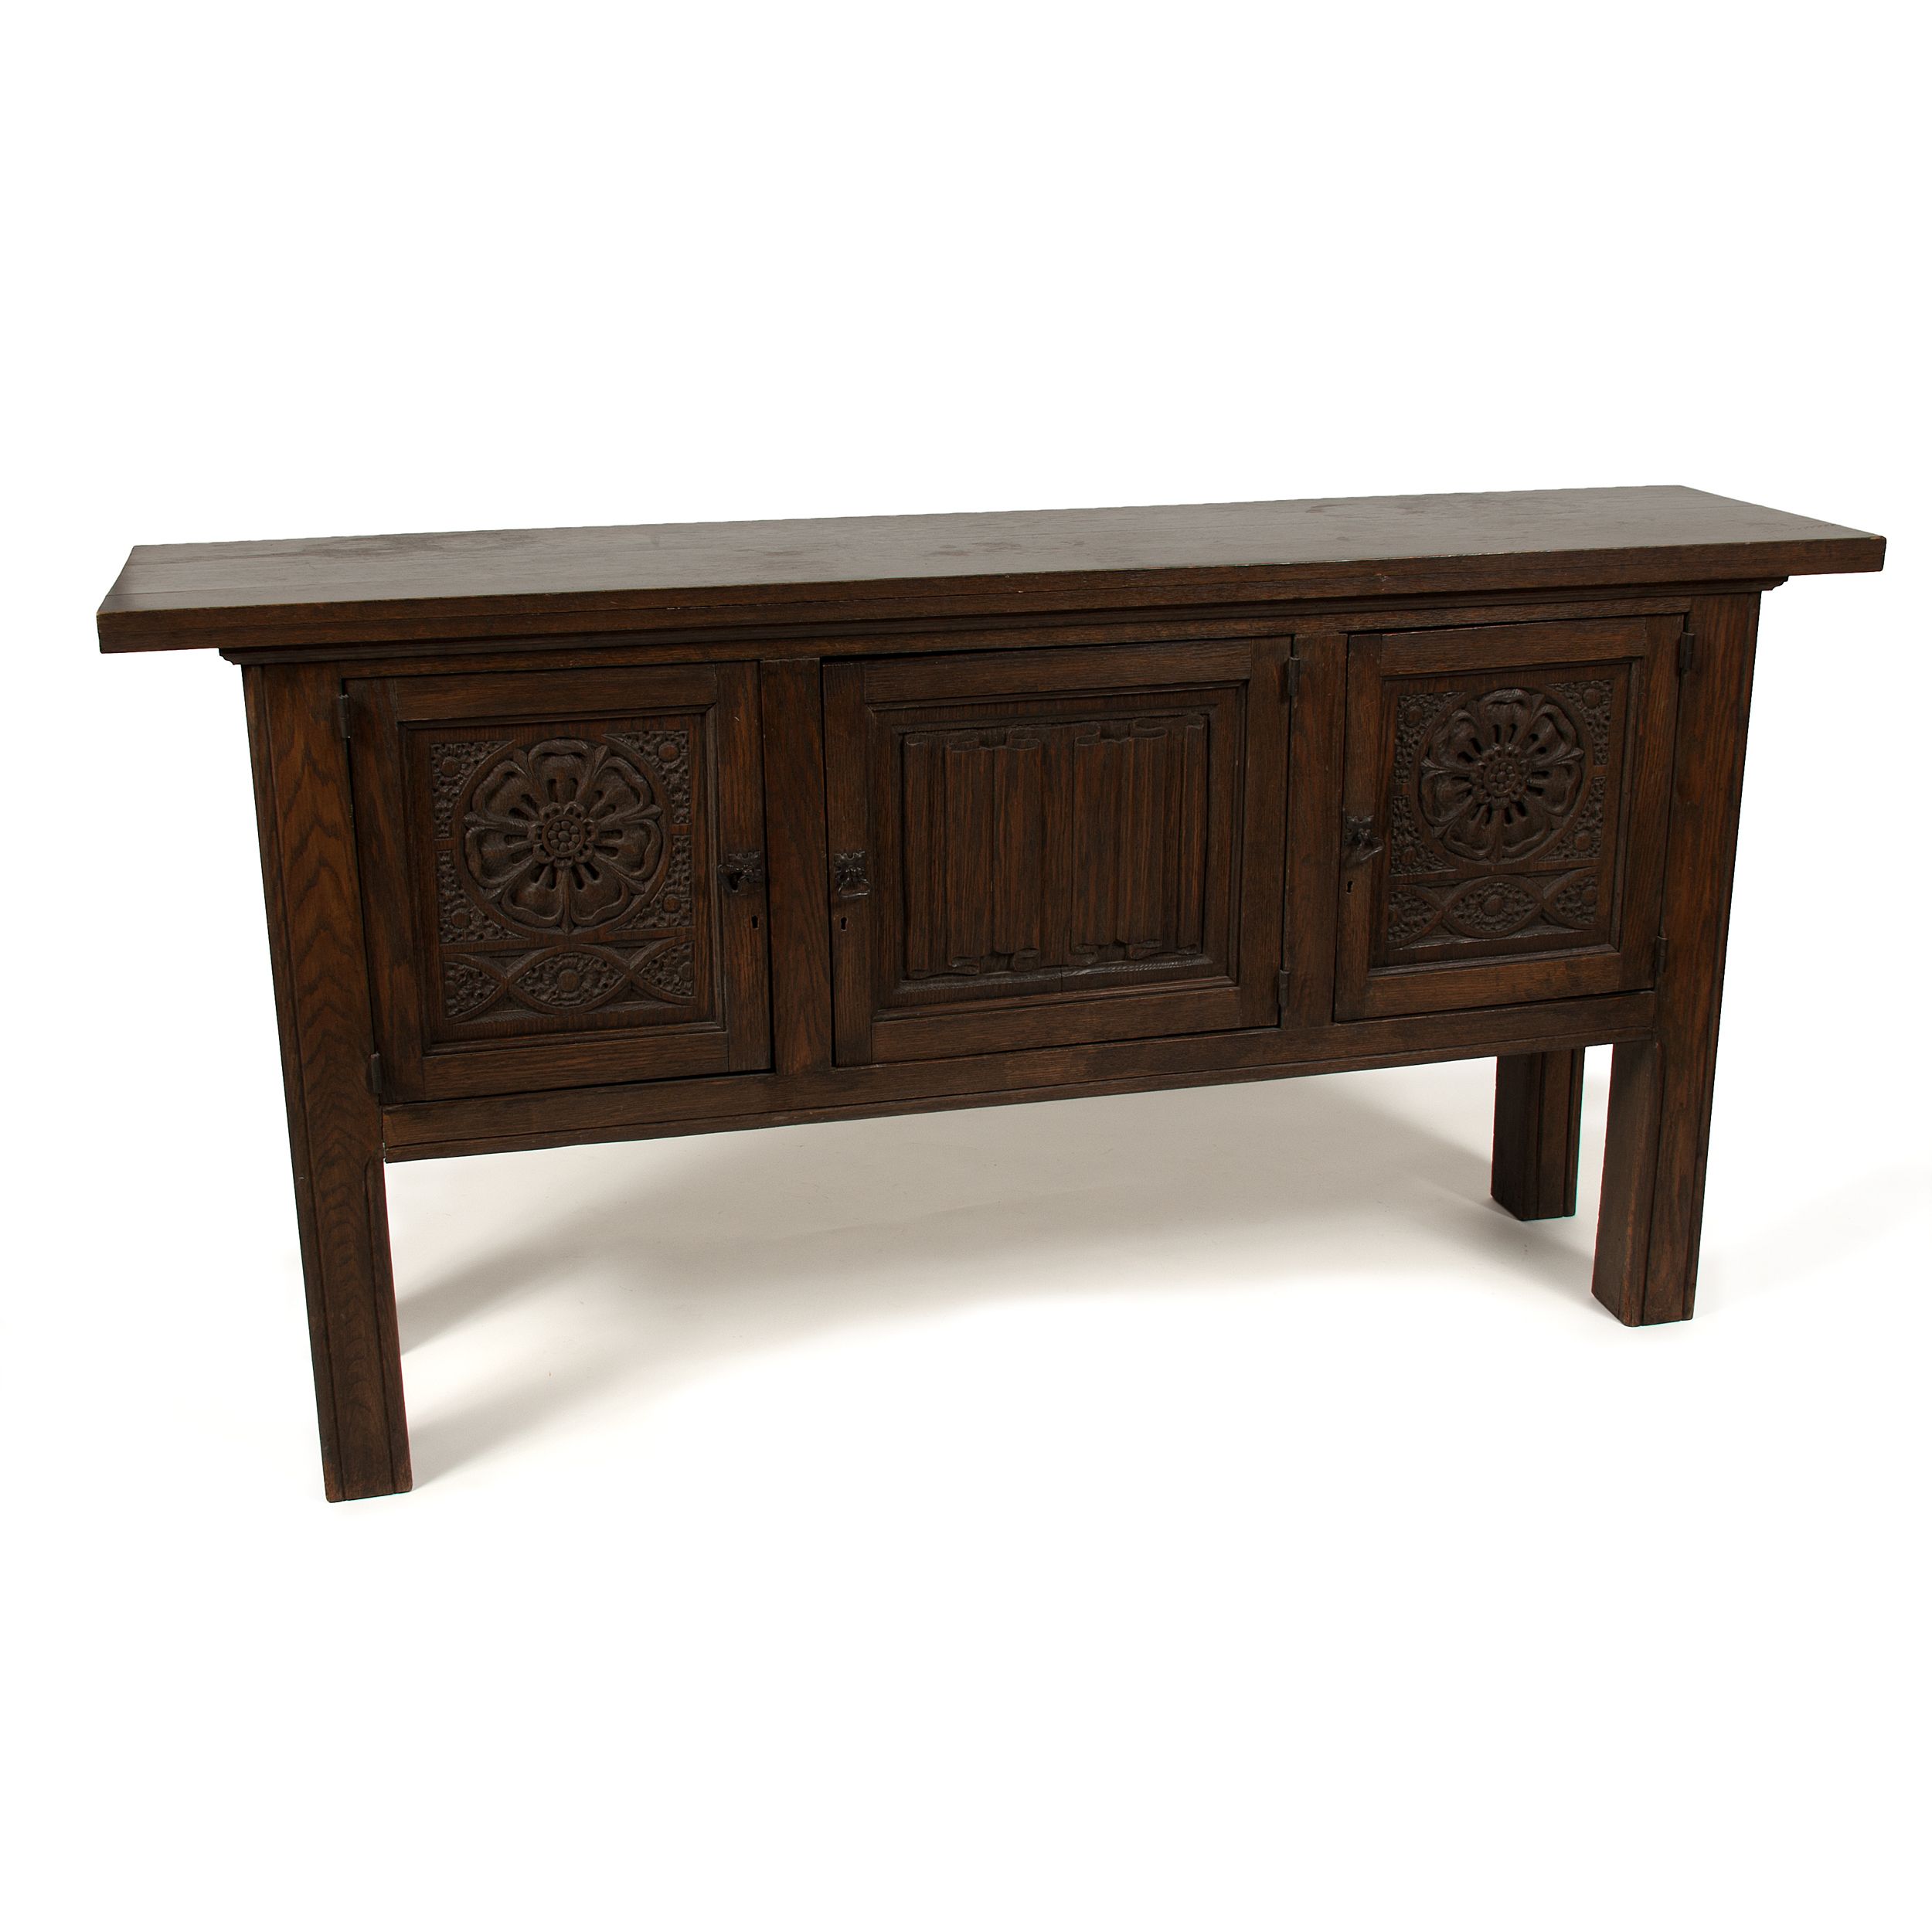 Renaissance Revival Carved Oak Sideboard | Cowan's Auction House: The Regarding Most Recently Released Cleveland Sideboard (View 6 of 20)